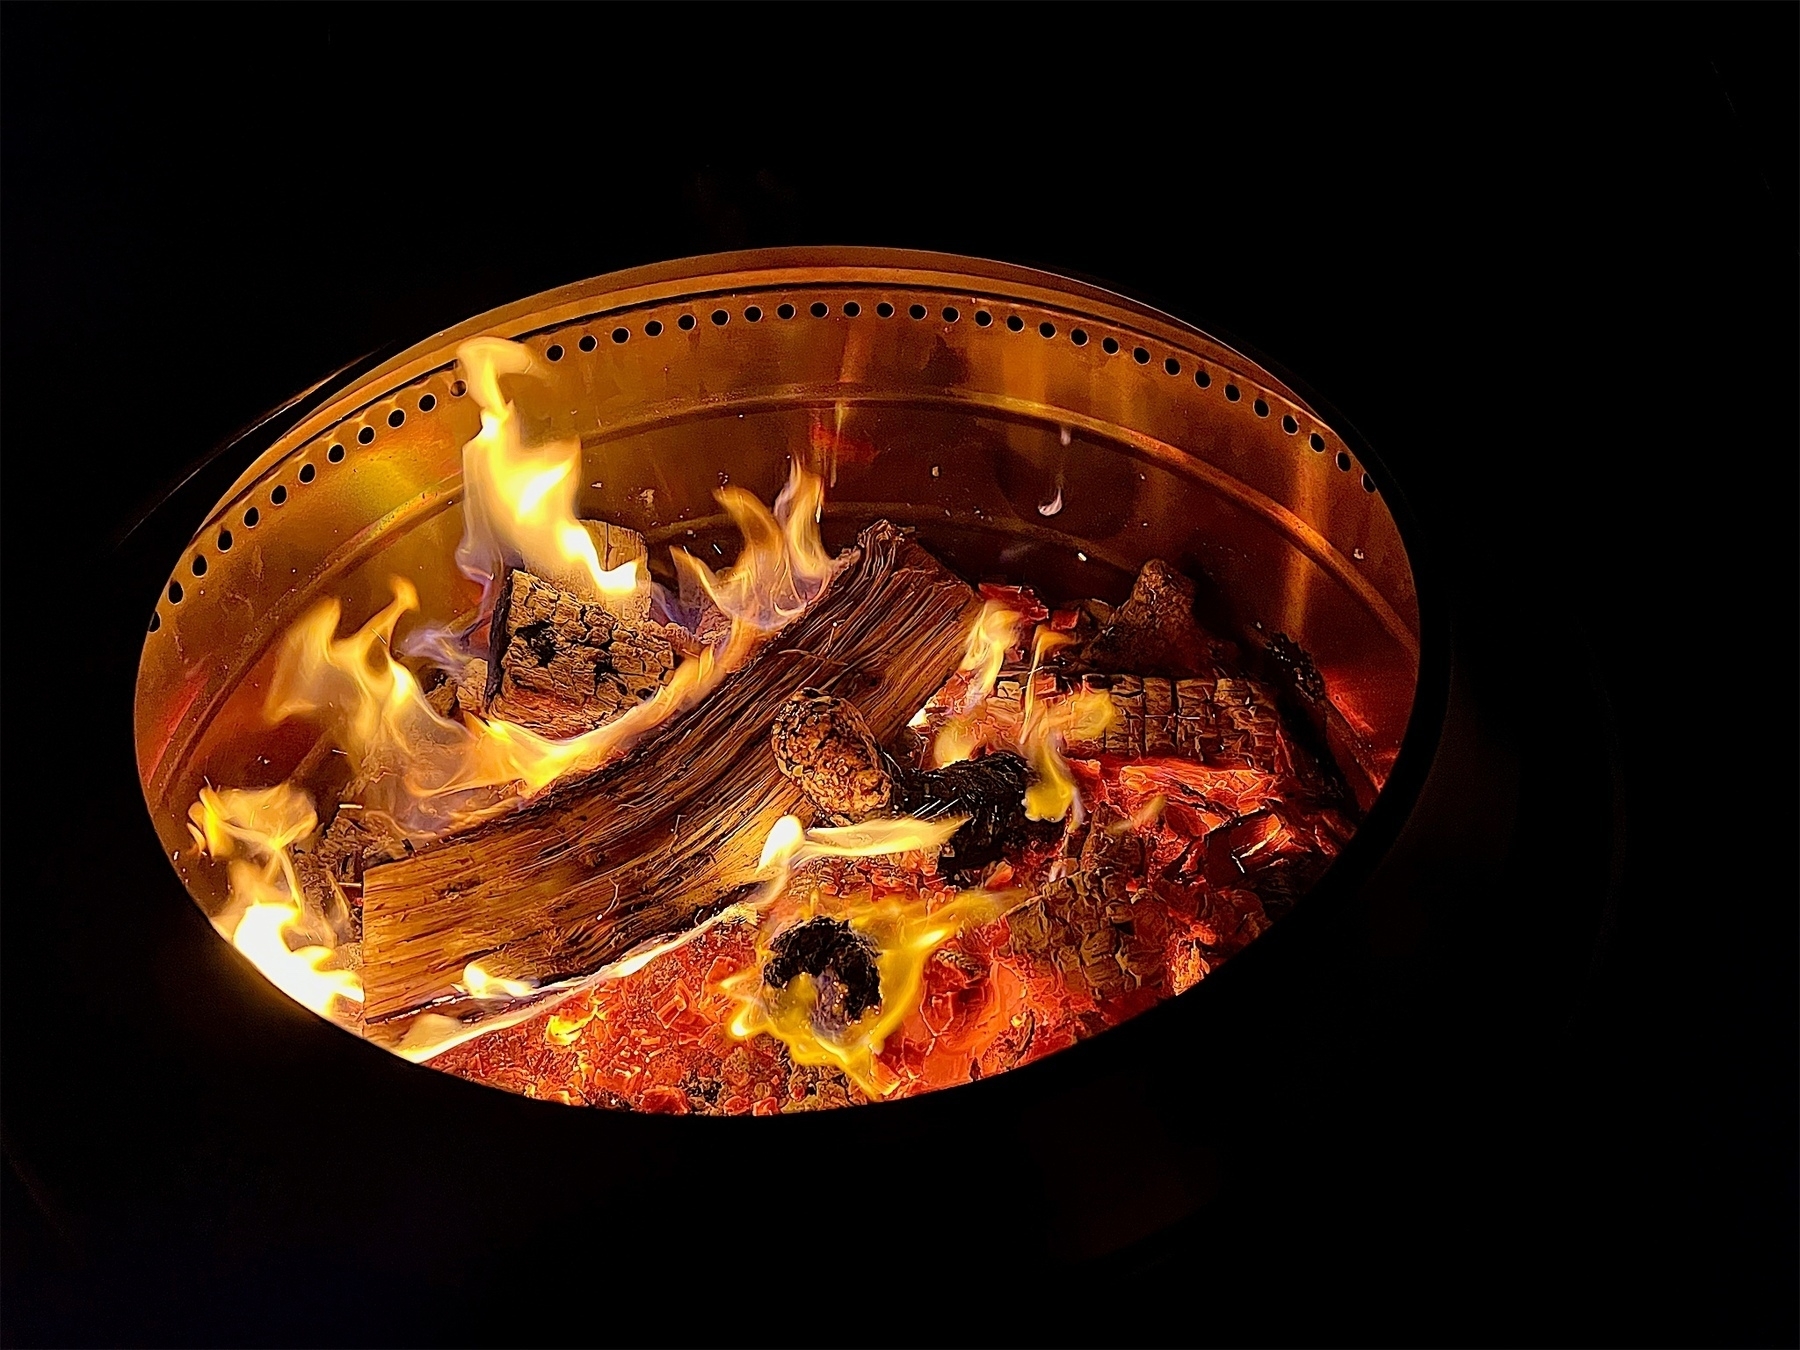 Fire contained within a metal fire-pit, with glowing embers and a few logs with flames licking upwards.